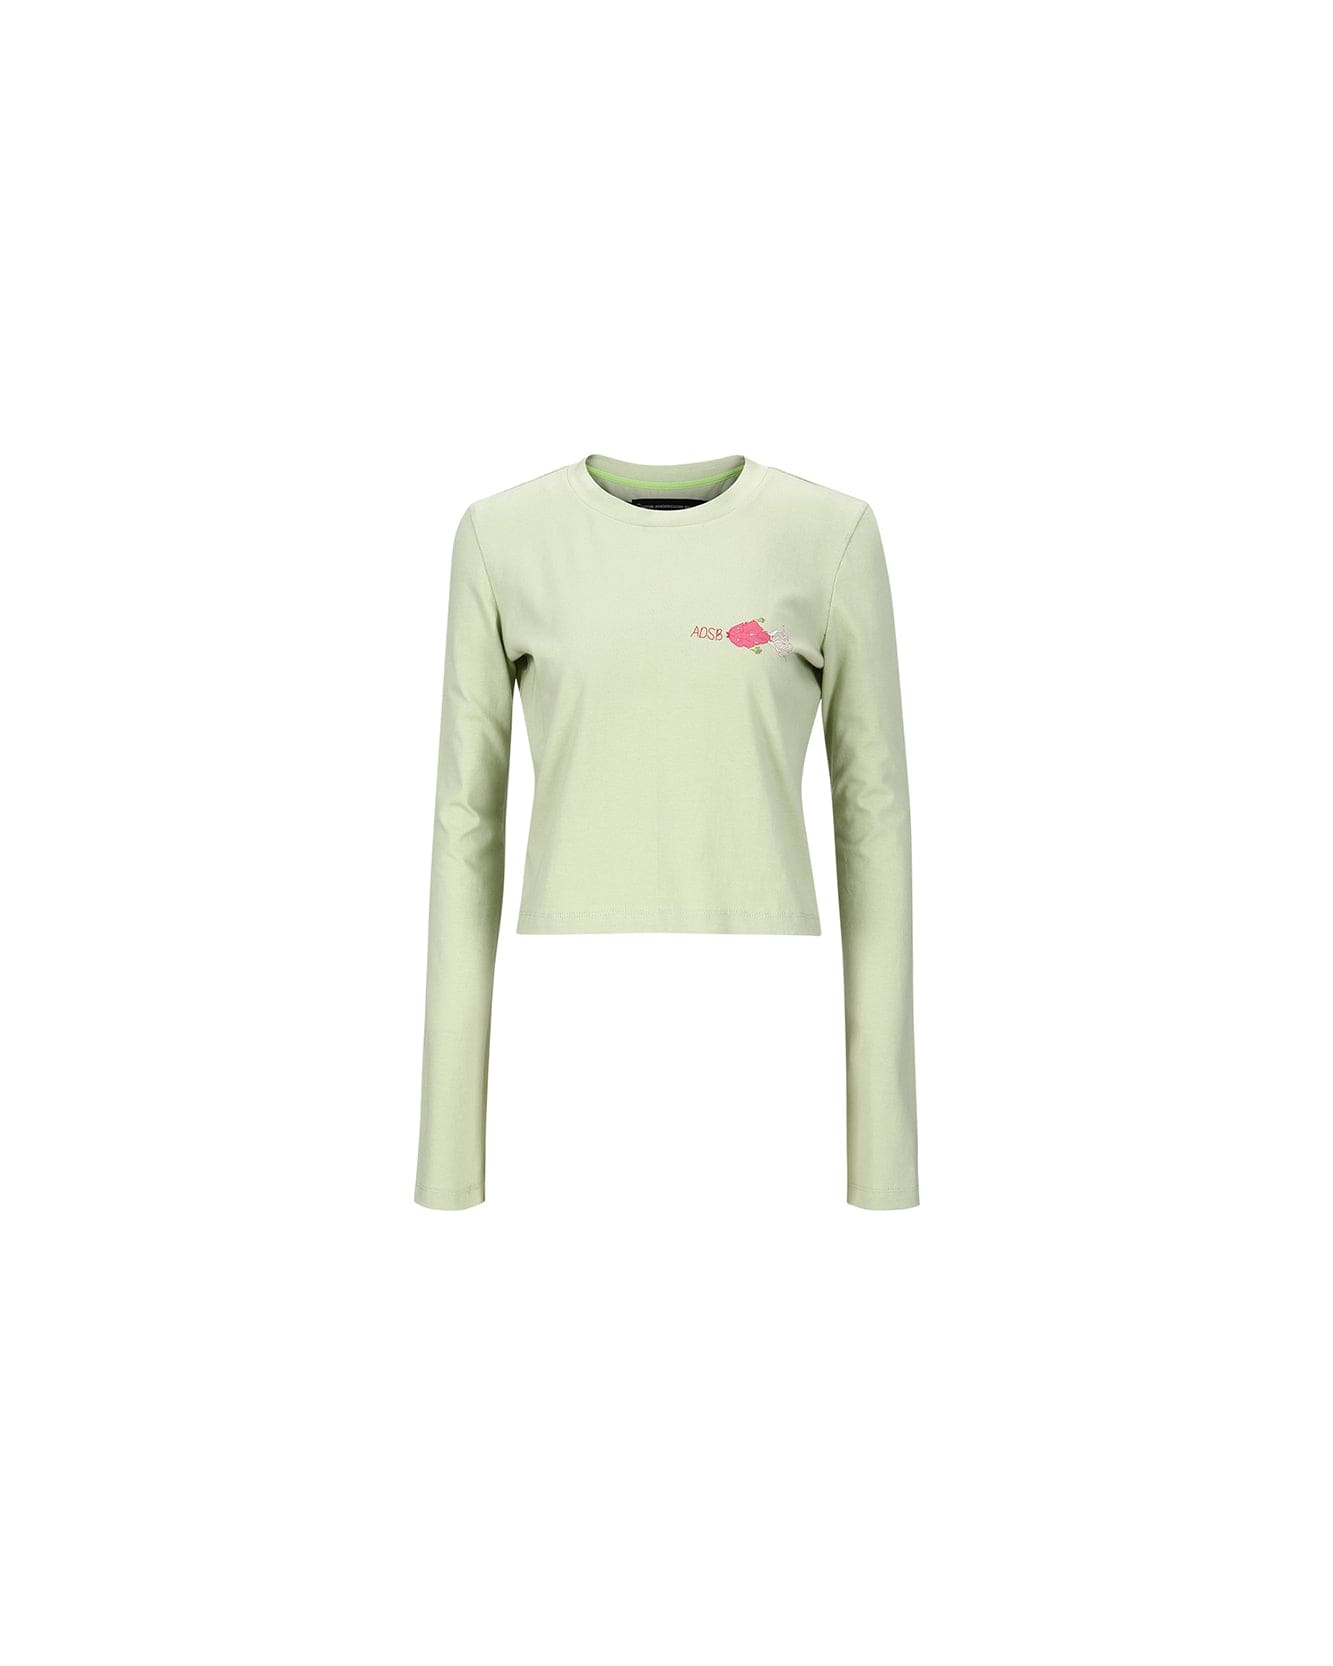 ESSENTIAL) (WOMEN) CRAZY FISH T-SHIRTS atb1004w(GREEN) – Andersson Bell